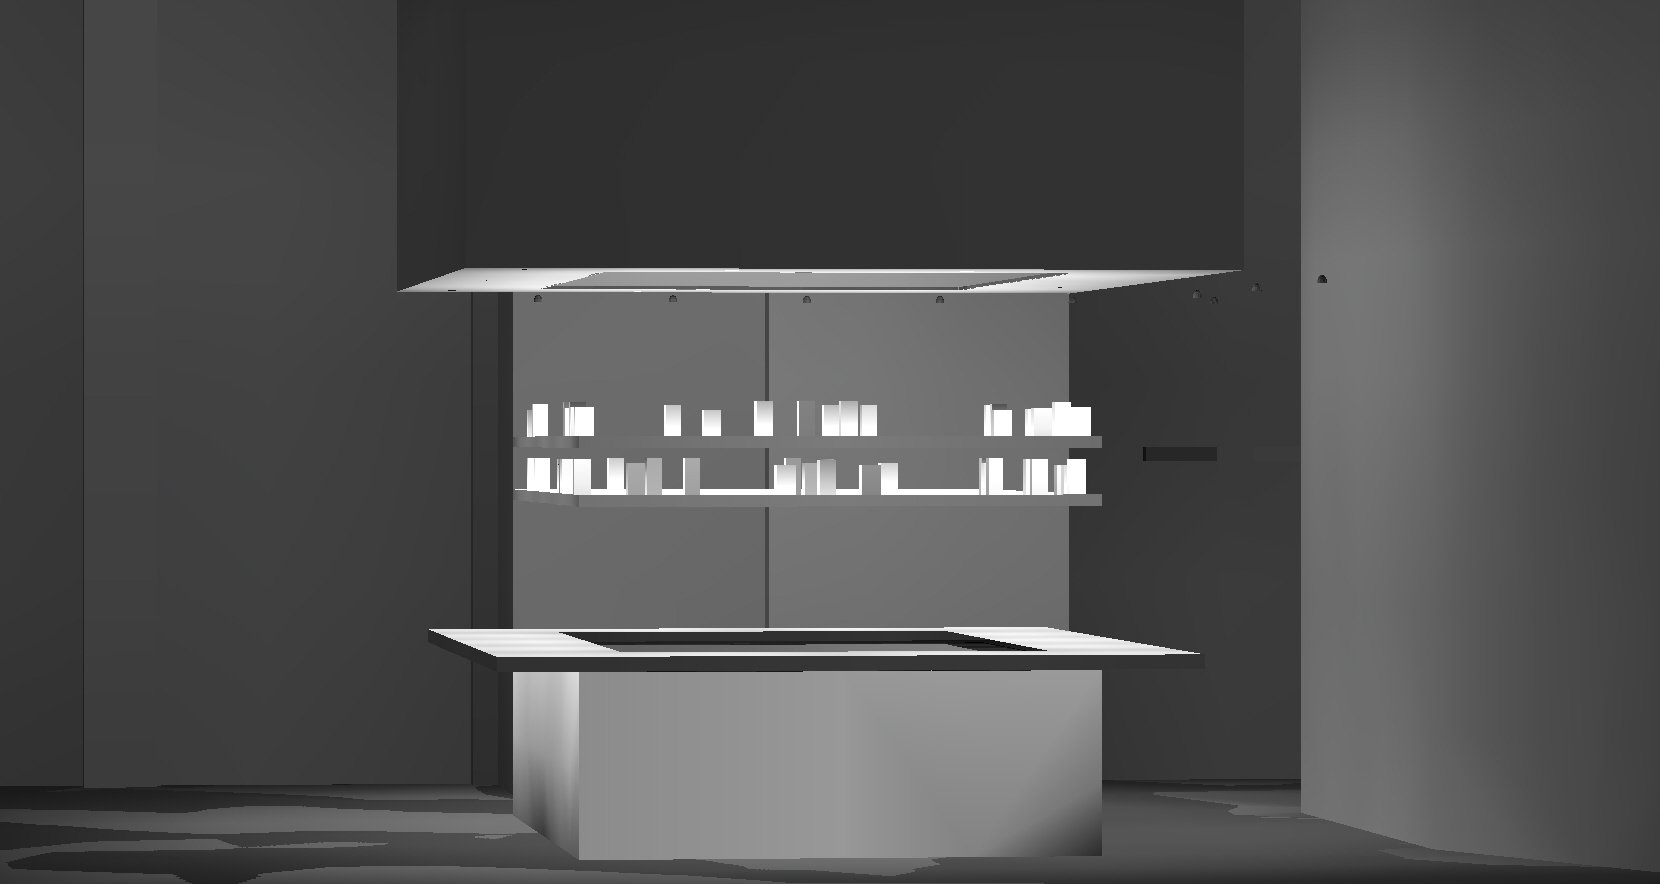  Photometric Render of the bar area  